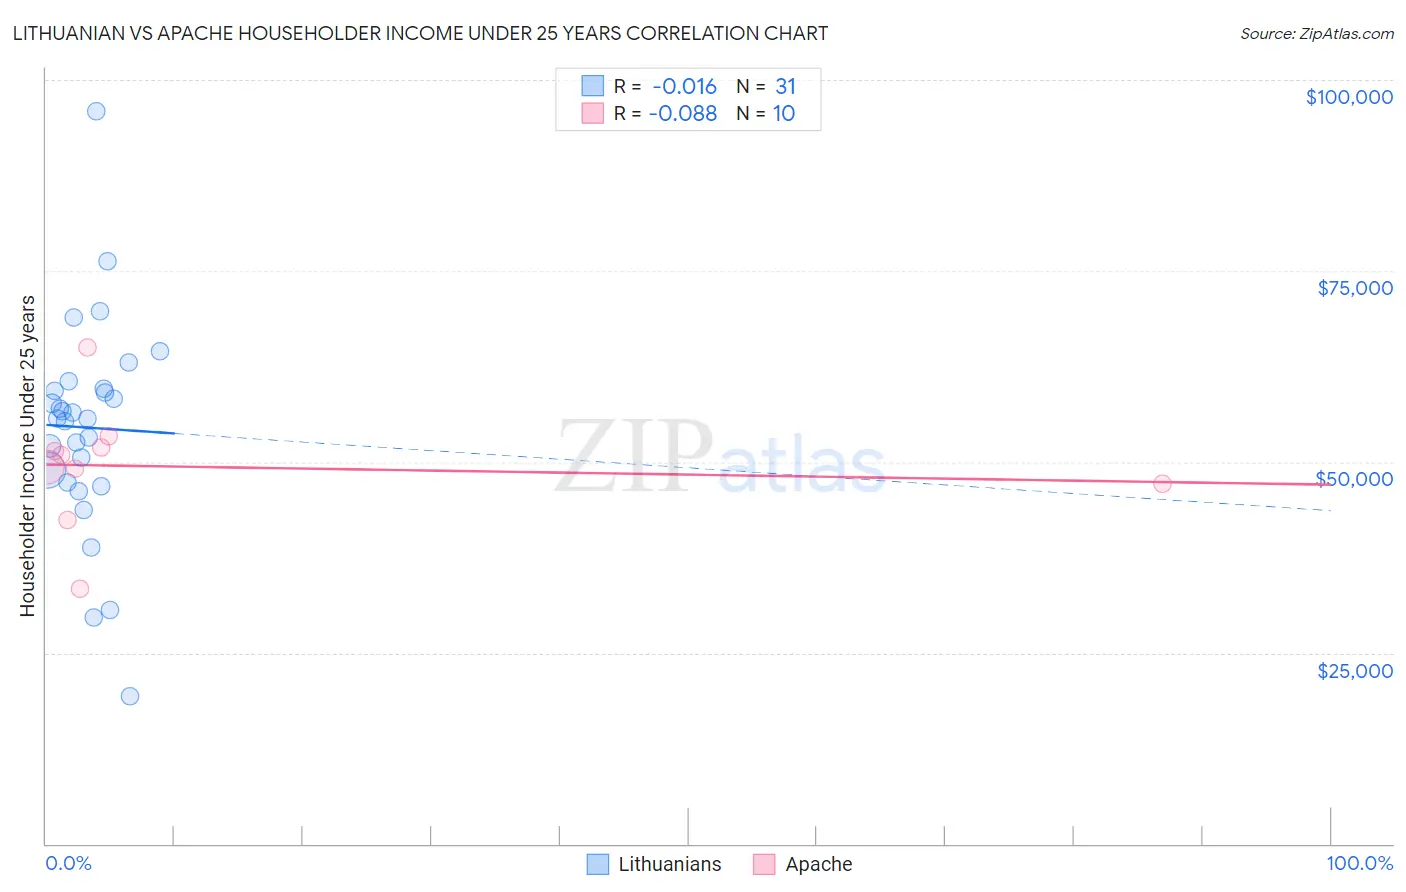 Lithuanian vs Apache Householder Income Under 25 years